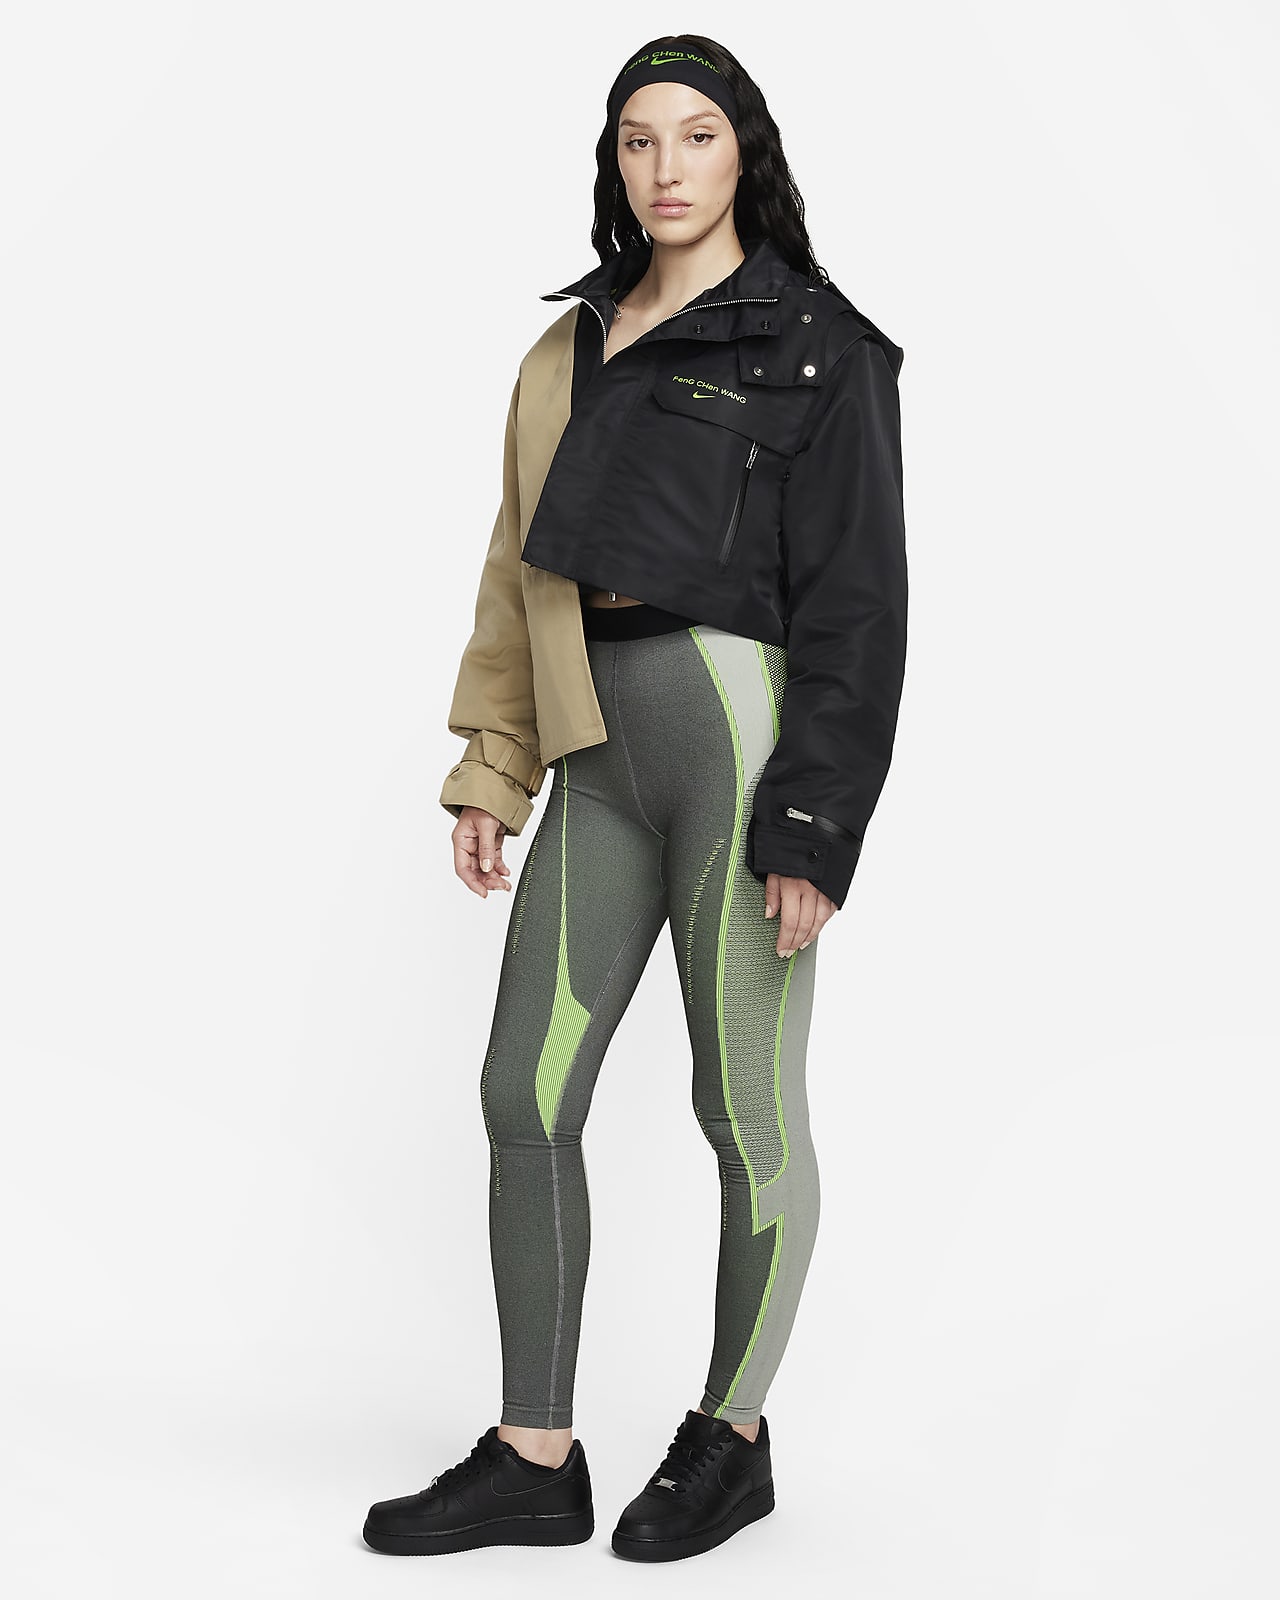 Get The Look: Kylie Jenner's Alexander Wang Leggings and White